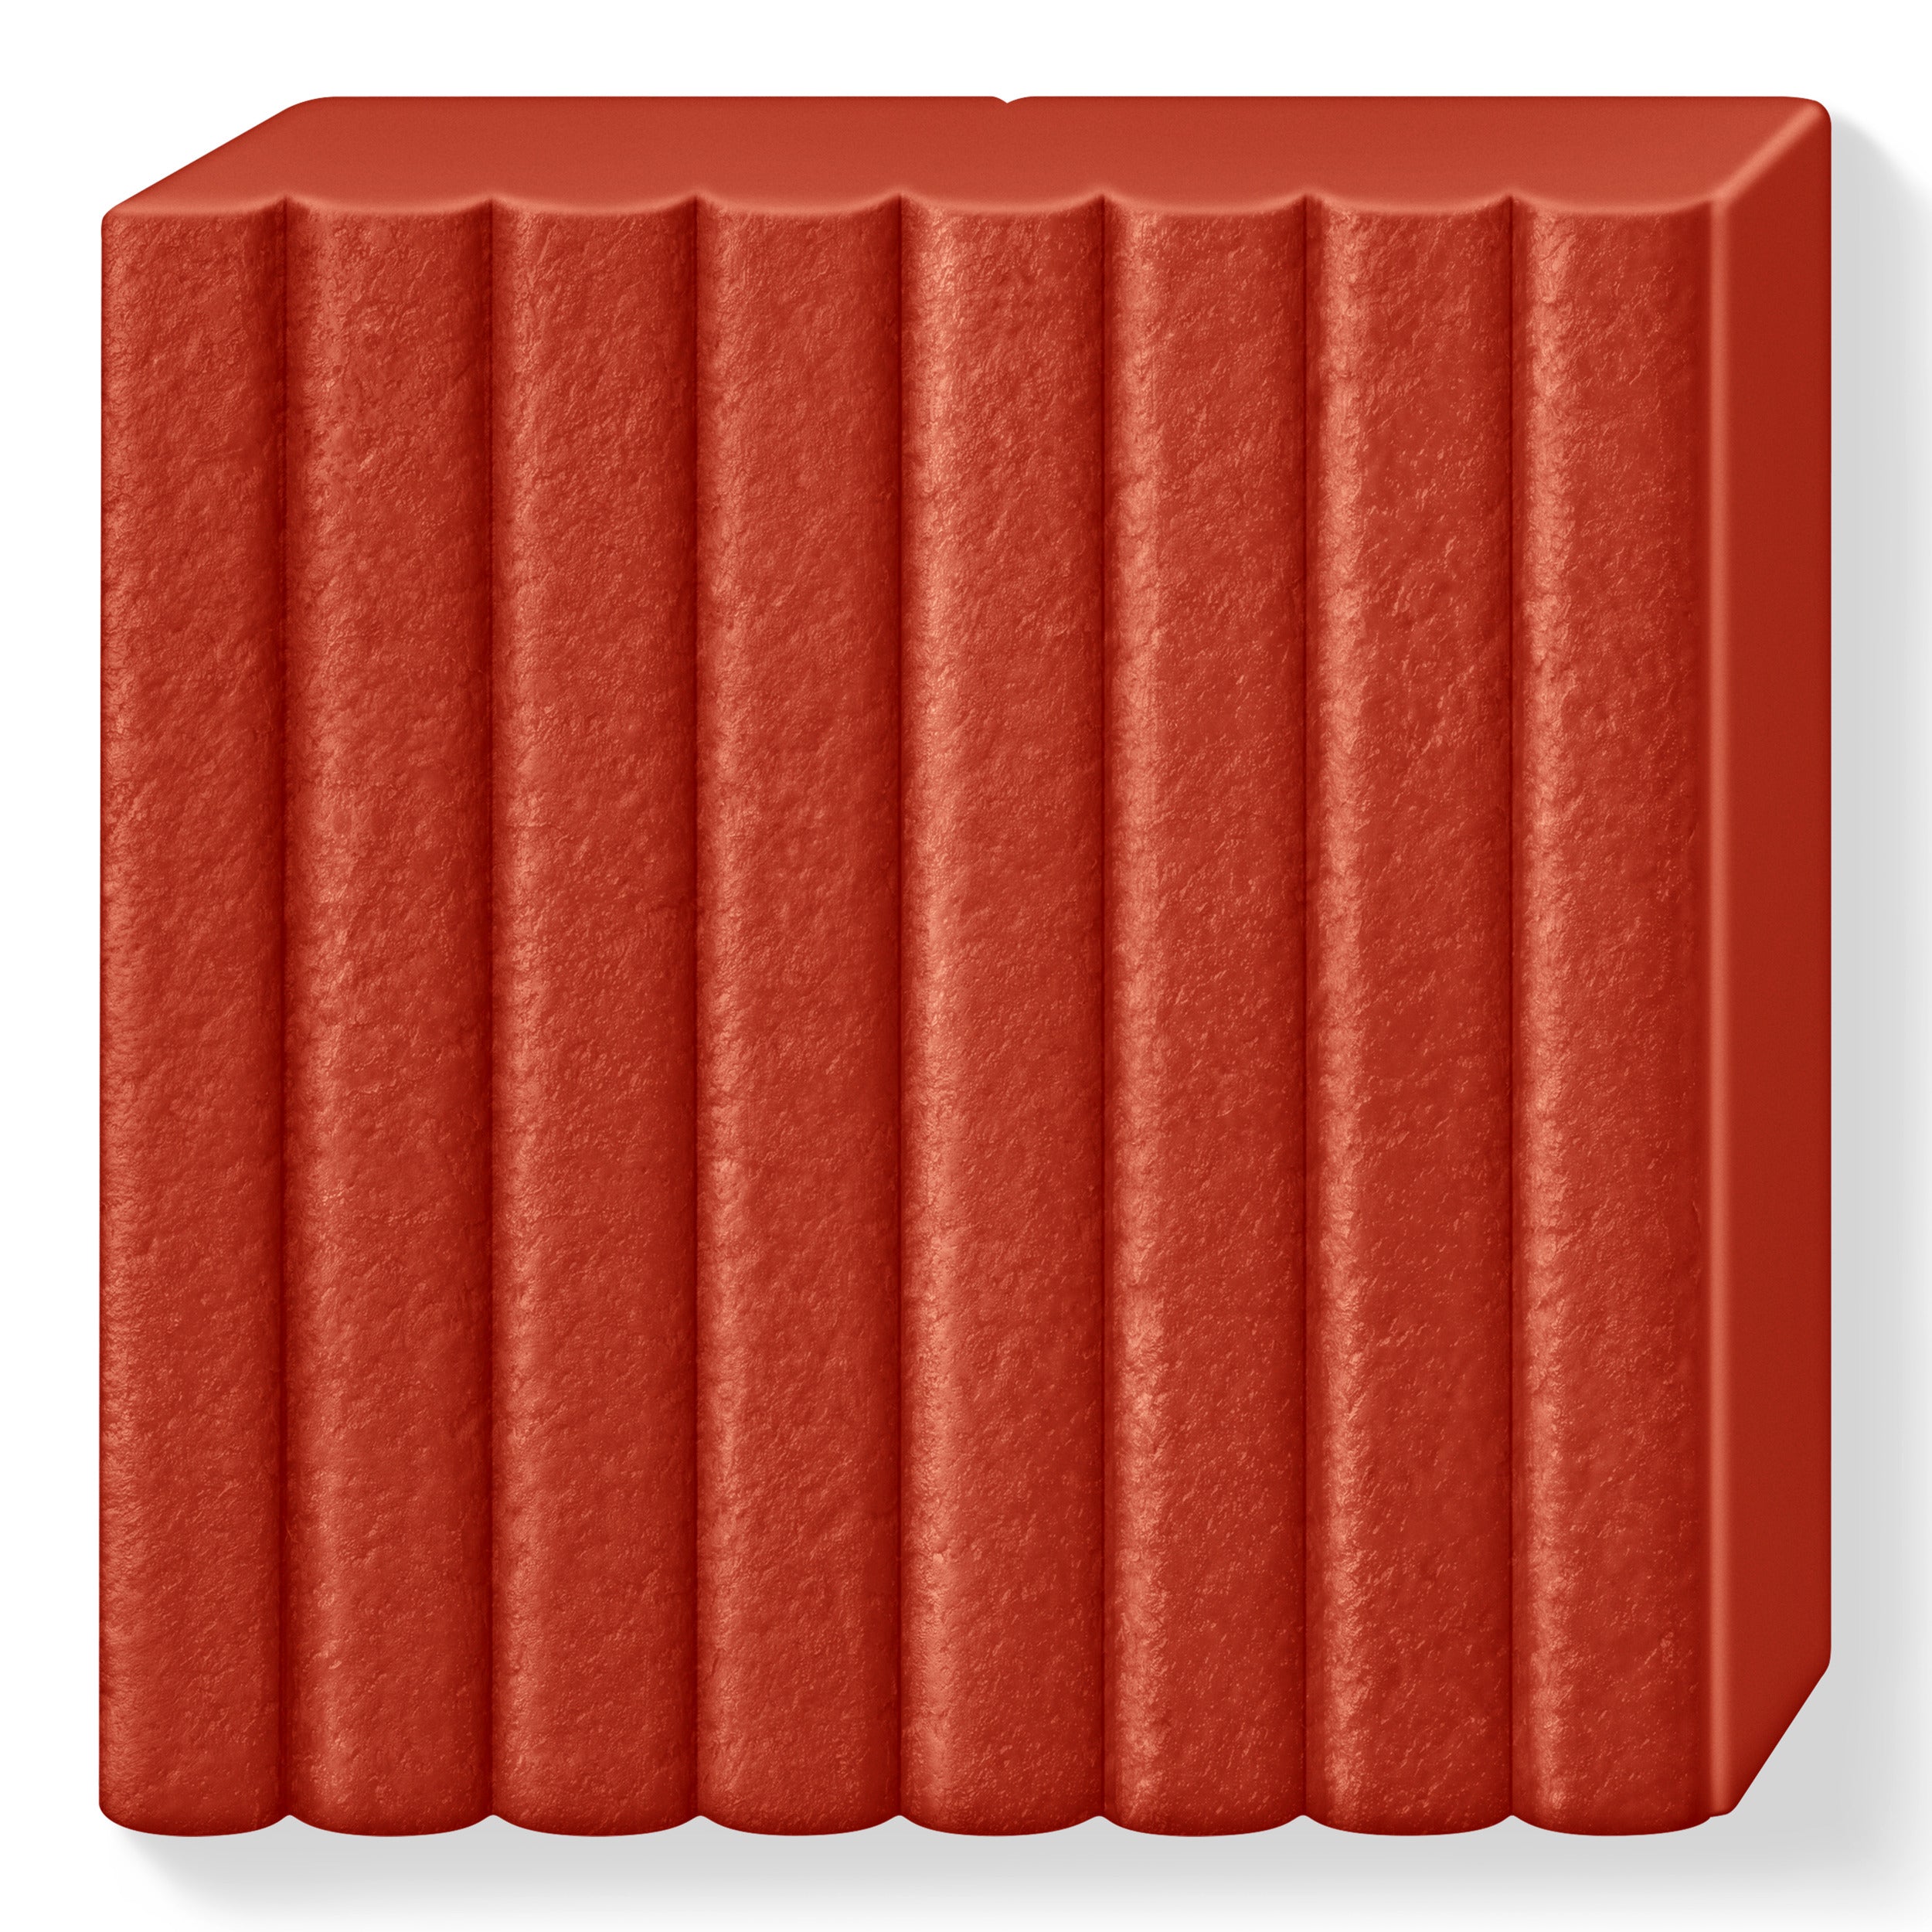 Fimo Leather Effect Polymer Clay Standard Block 57g (2oz) - Rust